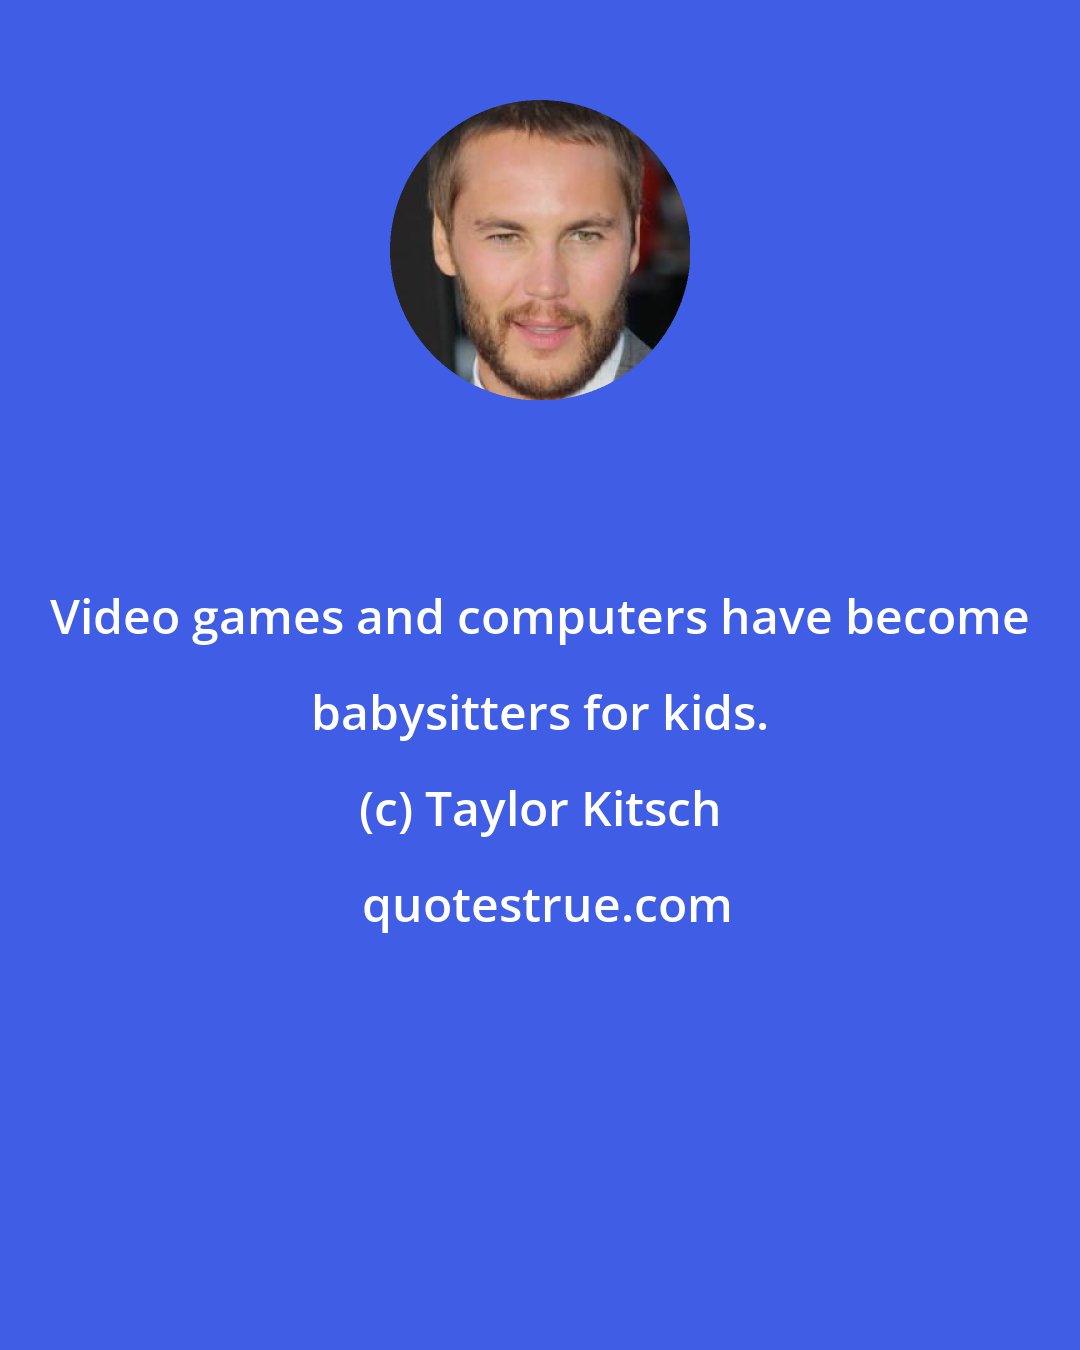 Taylor Kitsch: Video games and computers have become babysitters for kids.